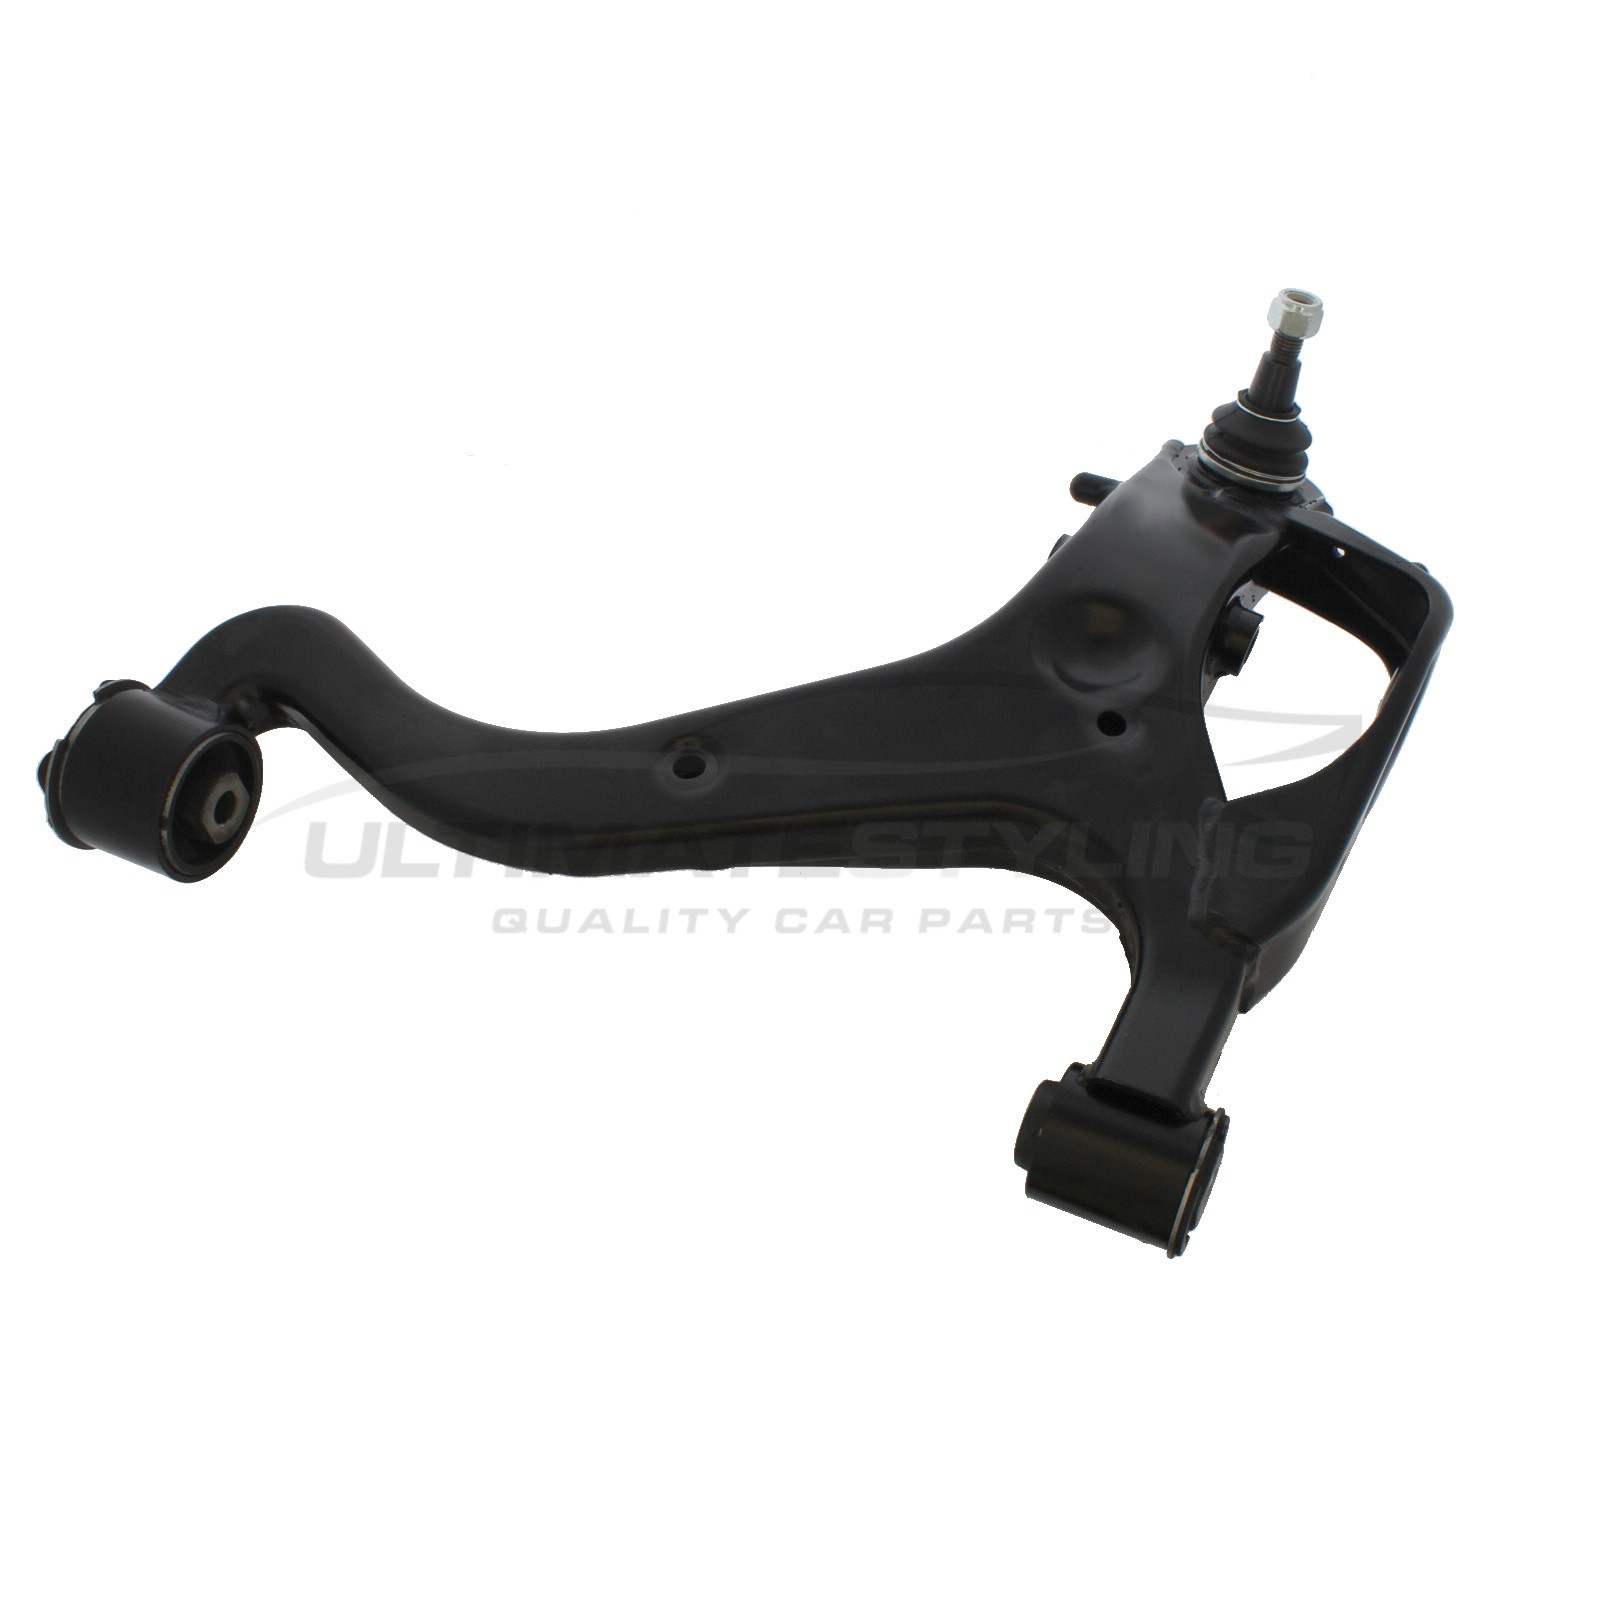 Land Rover Discovery 2004-2011, Land Rover Range Rover Sport 2005-2013 Front Lower Suspension Arm (Steel) Including Ball Joint and Rear Bush Driver Side (RH)